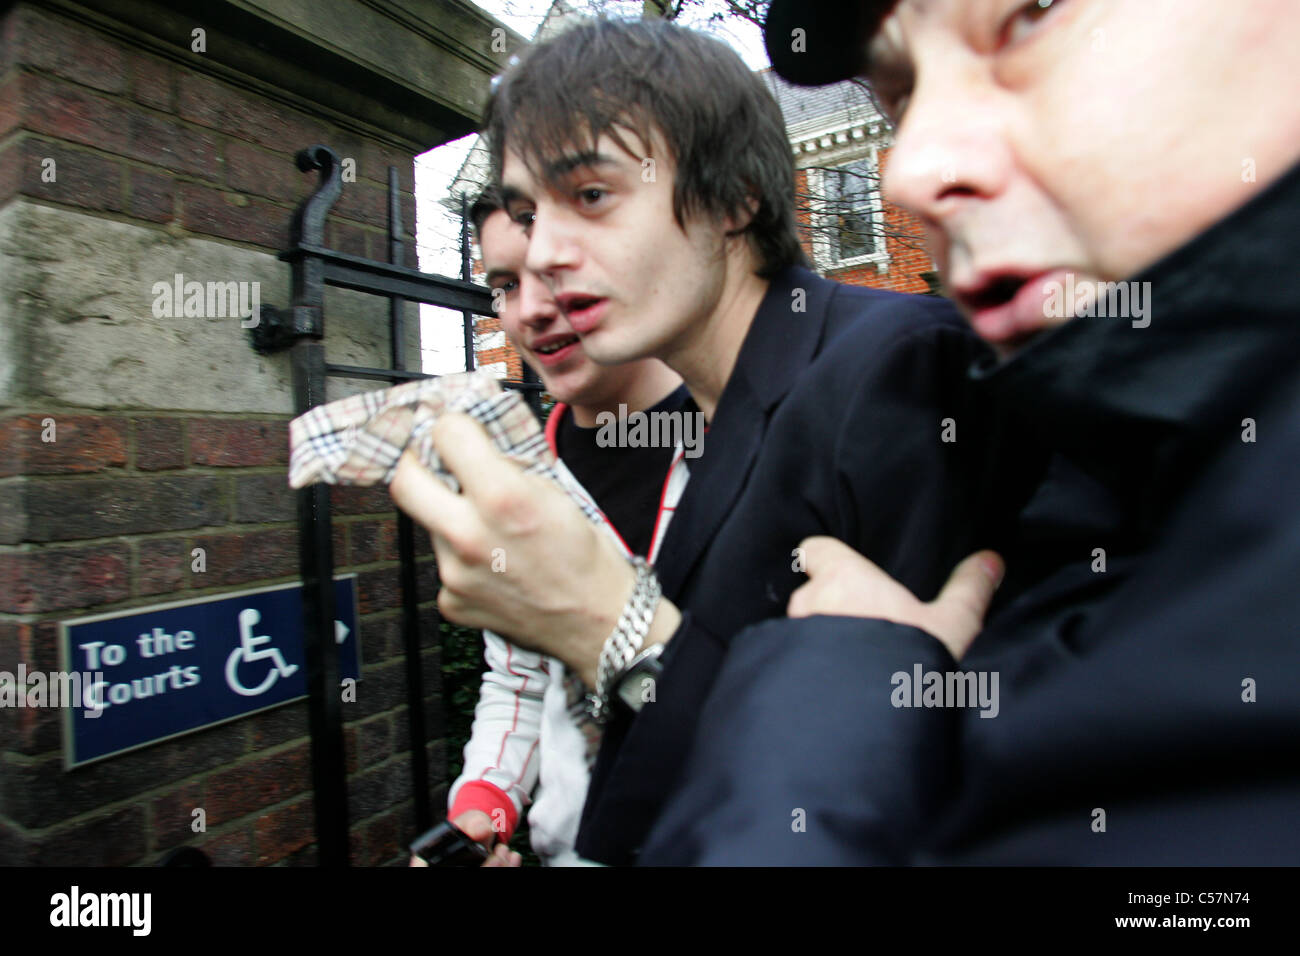 Musician Pete Doherty leaves Ealing Magistrates Court. Babyshambles lead singer Doherty, who had an on-off relationship with supermodel Kate Moss, appeared at court on Wednesday to hear charges of cocaine and heroin possession.  Picture by James Boardman. Stock Photo